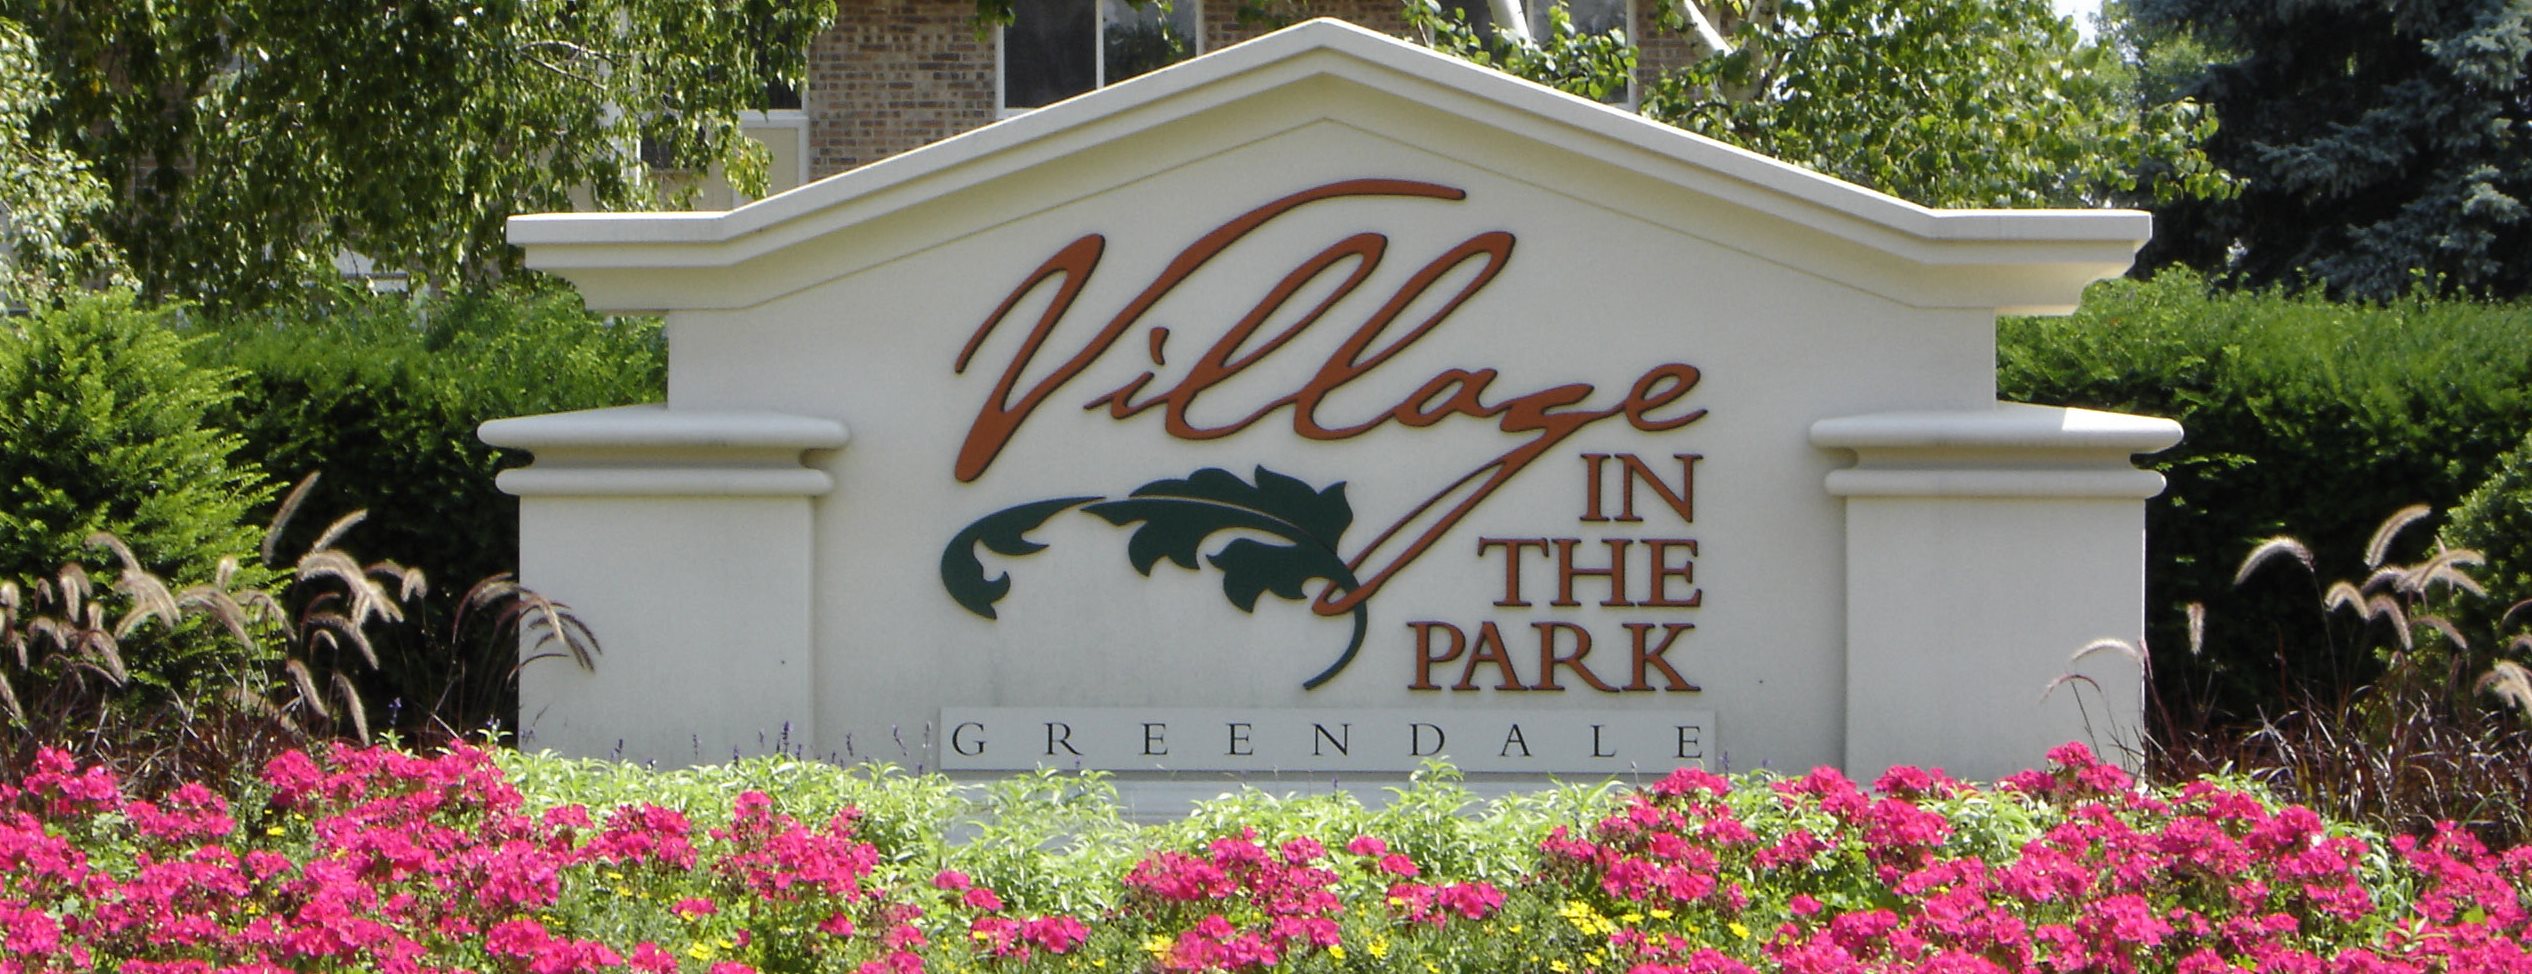 Village in the Park | Apartments in Greendale, WI